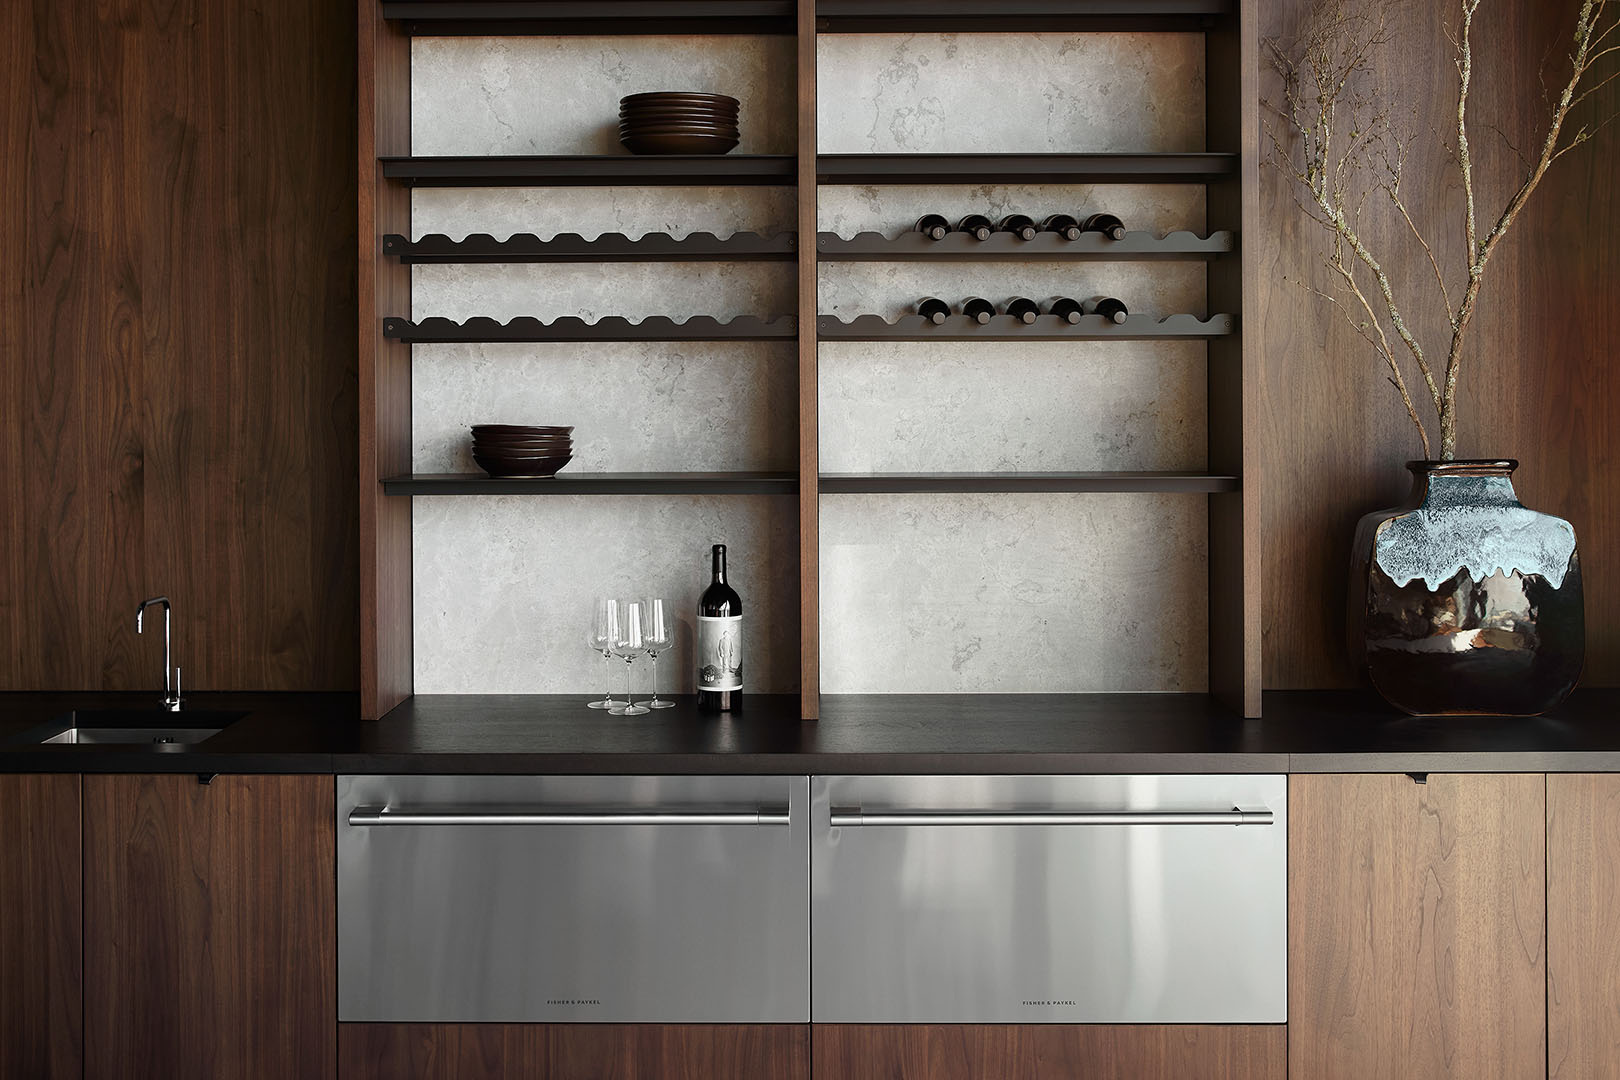 The wall-hung wet bar and CoolDrawer modules